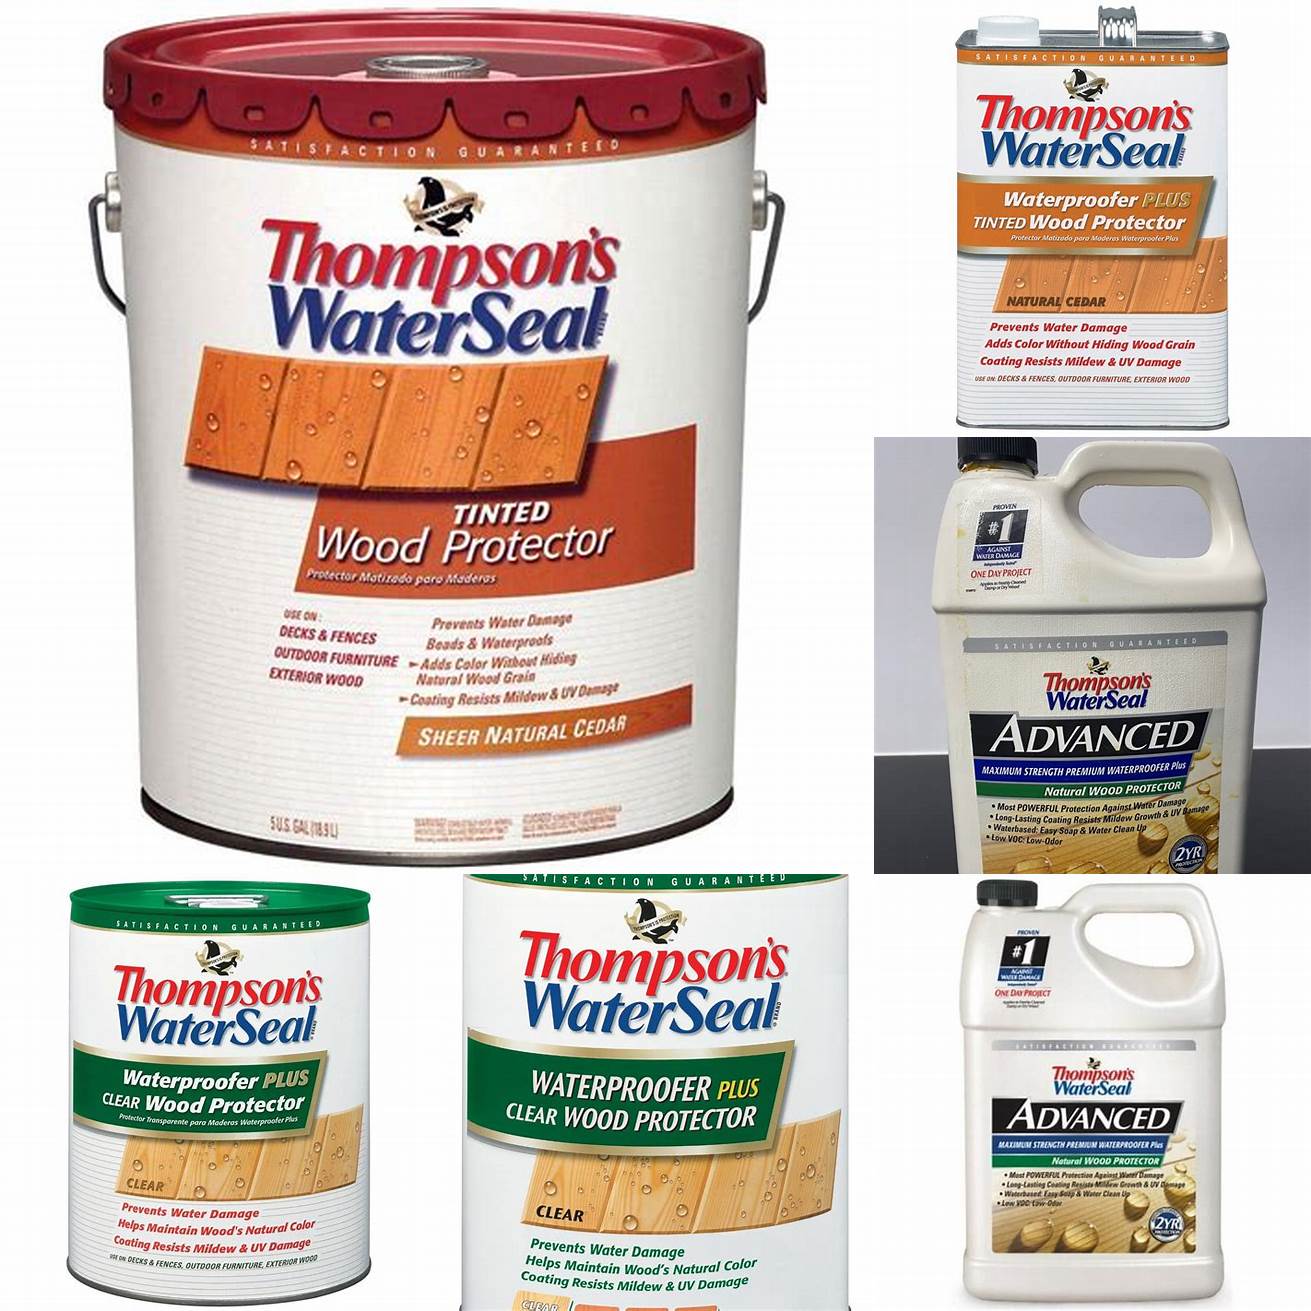 Thompsons WaterSeal Advanced Natural Wood Protector